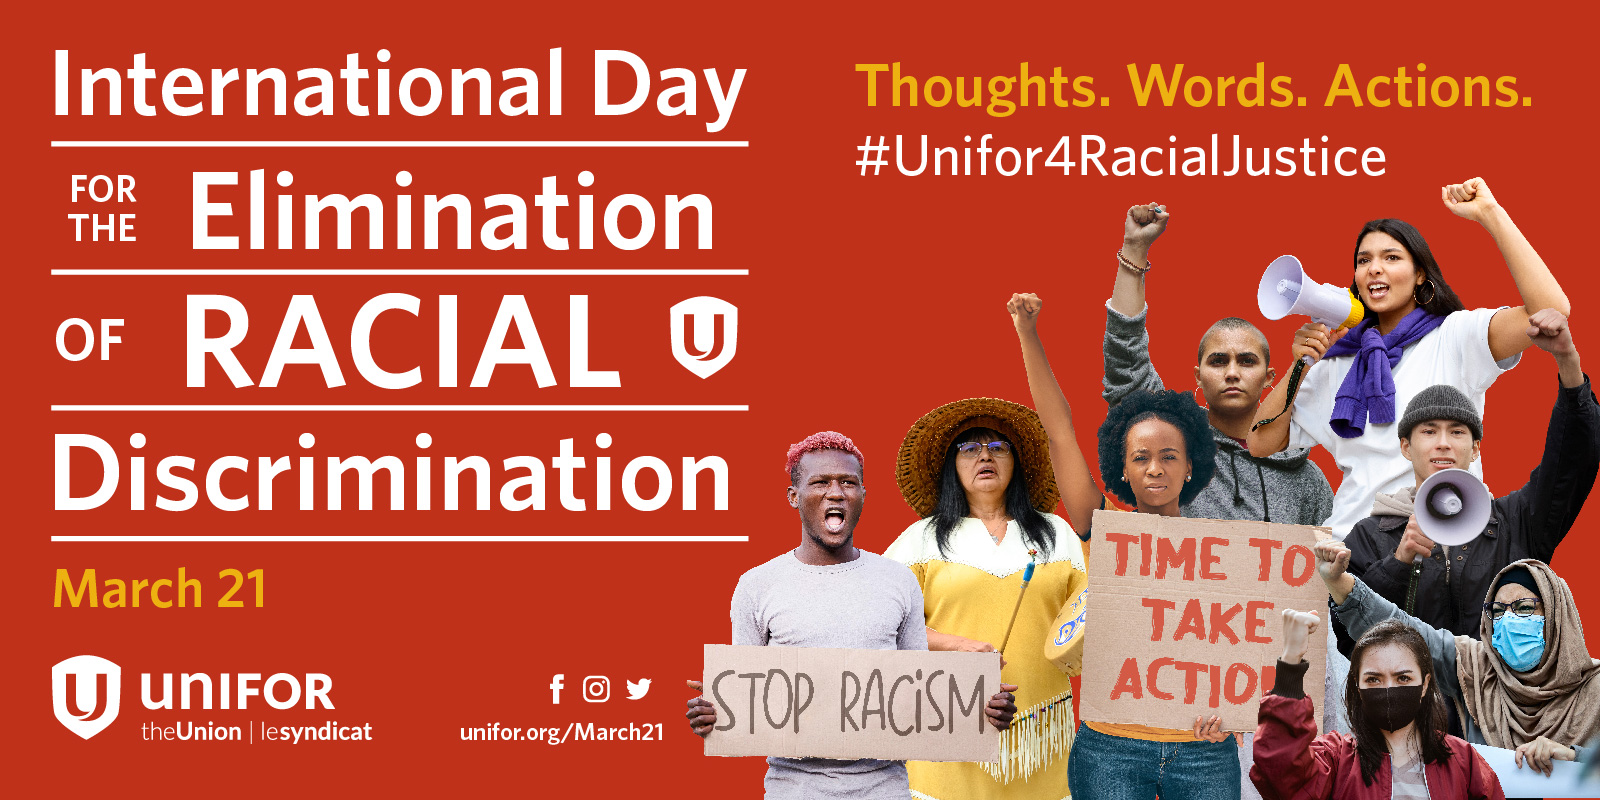 A diverse group of social activists with the text "International Day for the Elimination of Racial Discrimination"